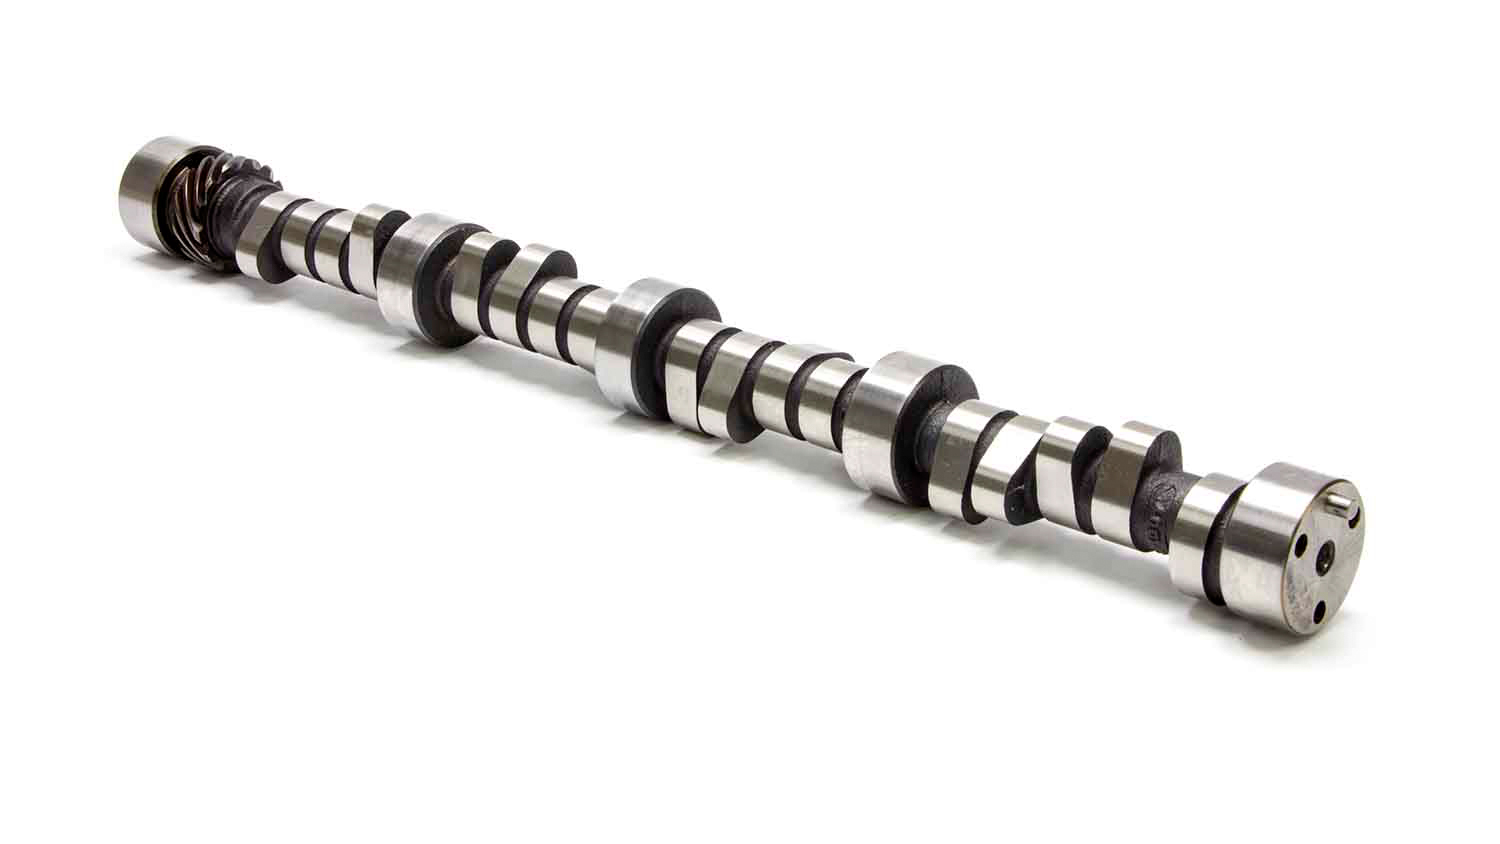 Lunati Cams 20120710 Camshaft, Voodoo Retro-Fit, Hydraulic Roller, Lift 0.507 / 0.515 in, Duration 262 / 270, 112 LSA, 1600 / 5600 RPM, Small Block Chevy, Each